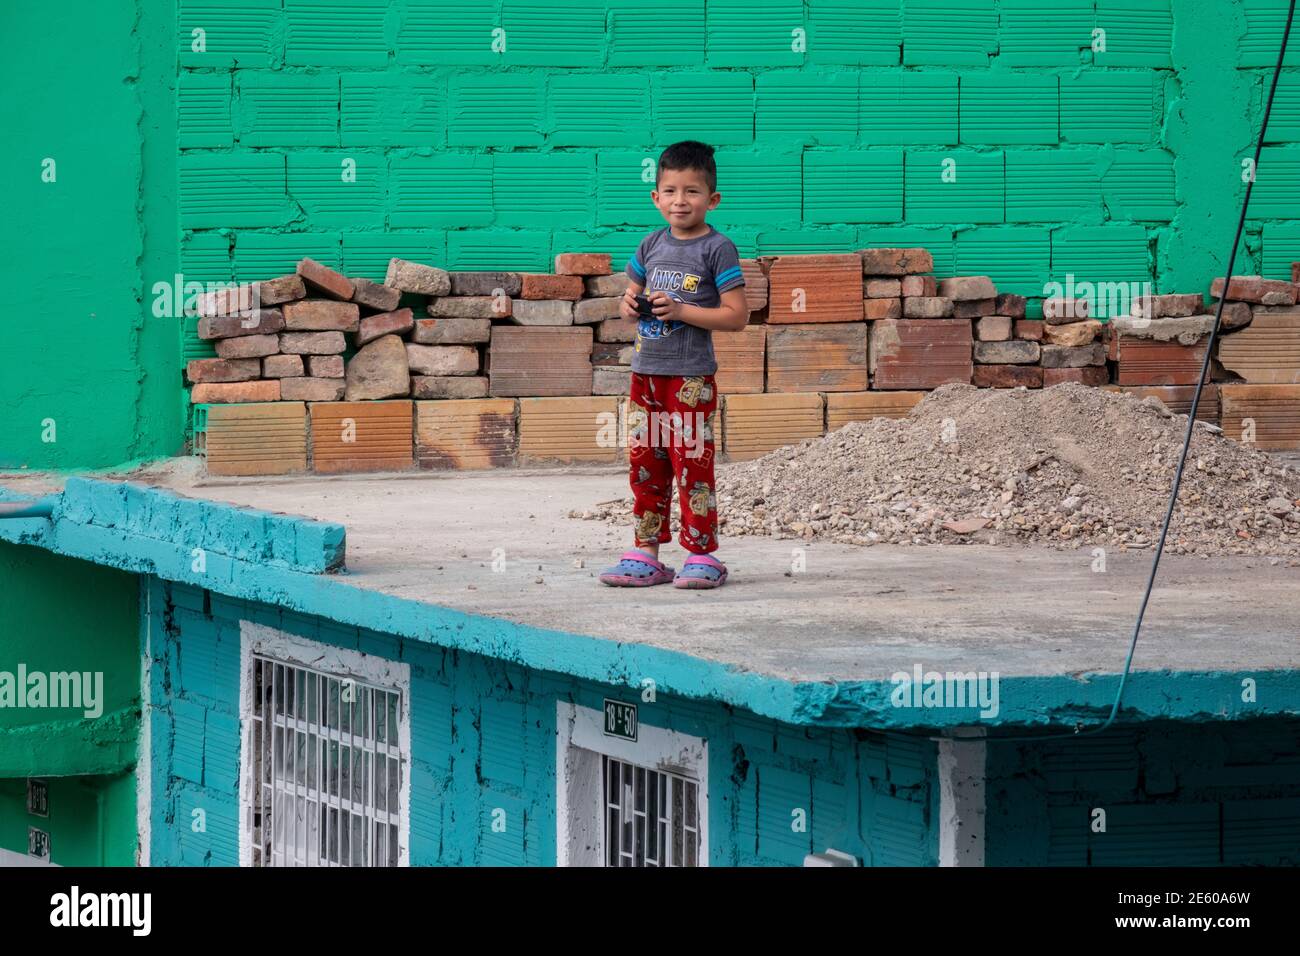 Bogota, Colombia - 20. February 2020: Comuna El Paraiso, a poor town in the south of Bogota, the mostly mountainous rural town includes one of the lar Stock Photo